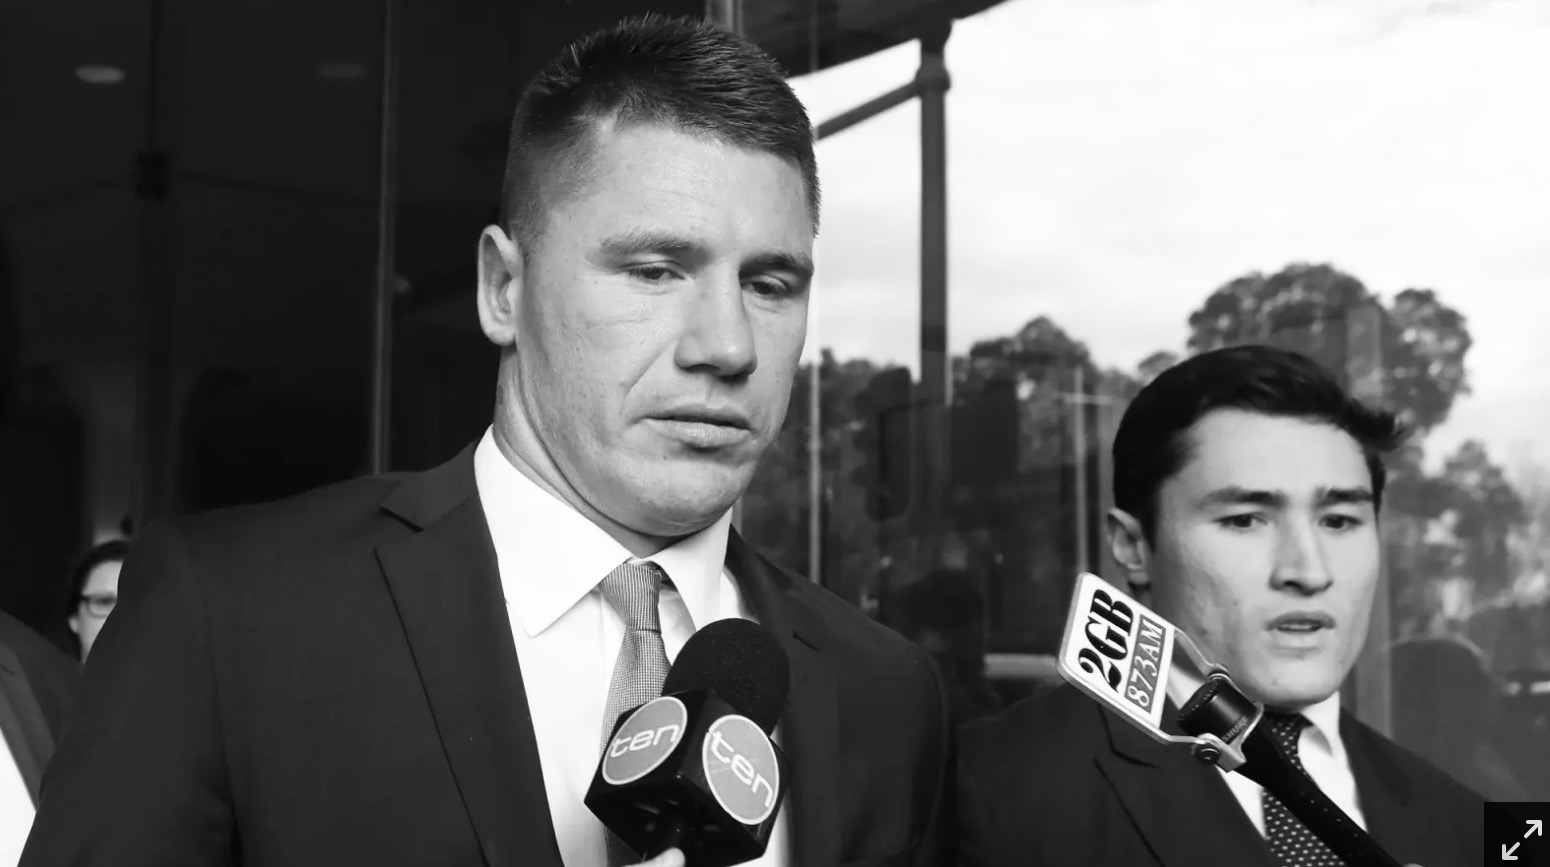 Ex-Roosters star Shaun Kenny-Dowall escapes conviction for cocaine possession